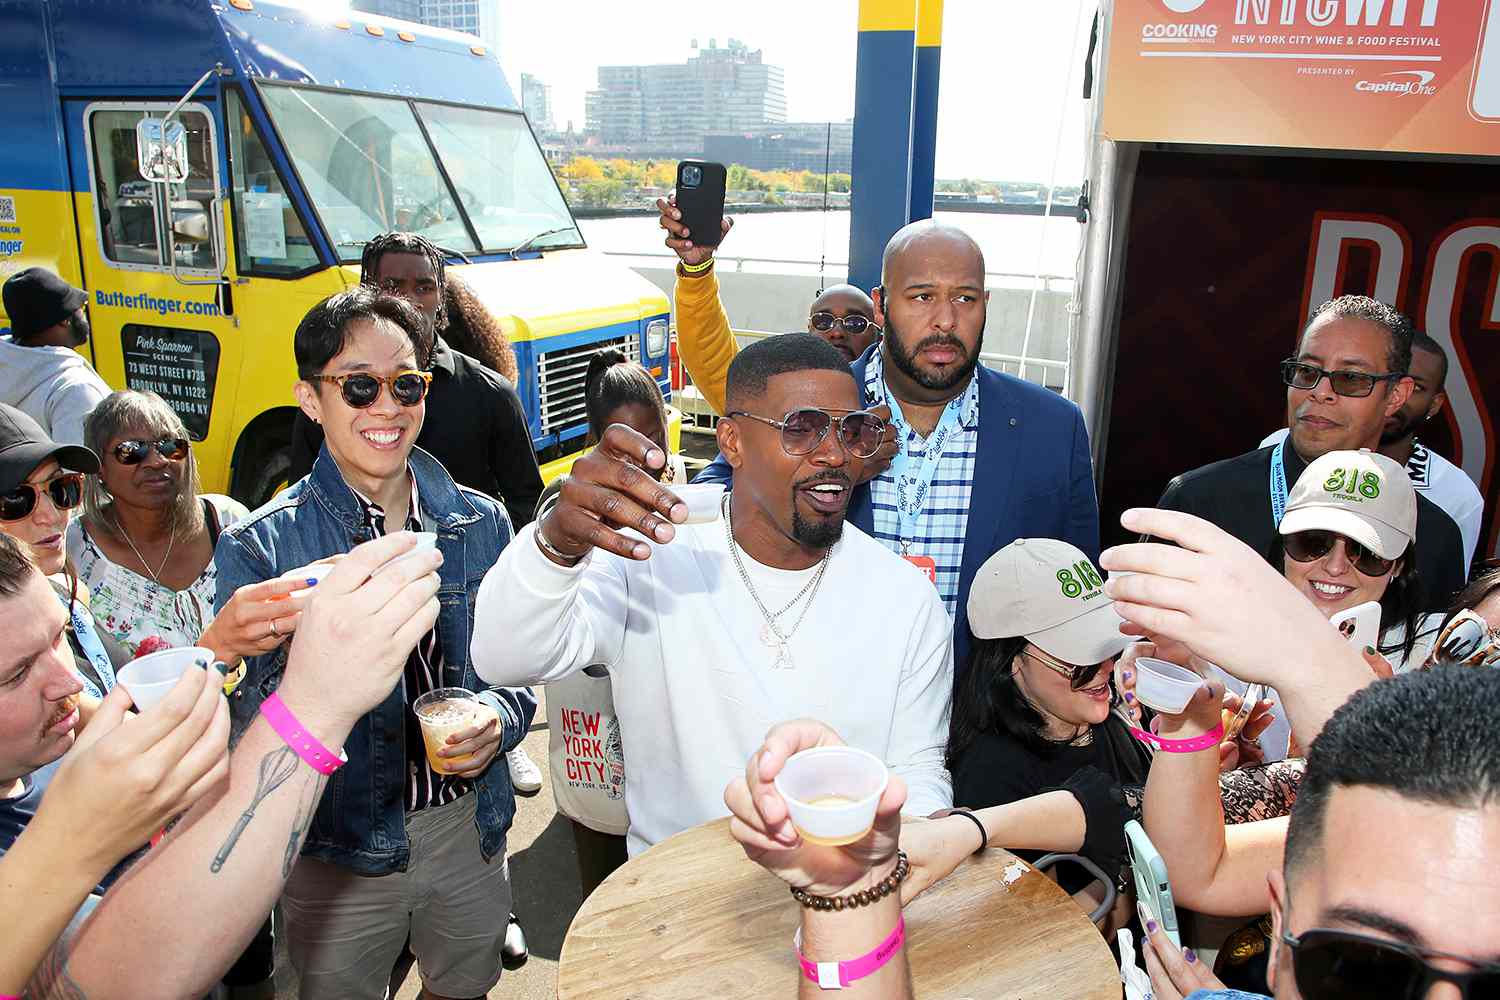 Jamie Foxx participates in a Brown Sugar Bourbon tasting during Southern Glazer's Wine & Spirits TRADE DAY at the Grand Tasting hosted by Wine Spectator during the Food Network & Cooking Channel New York City Wine & Food Festival presented by Capital One at Pier 76 on October 15, 2021 in New York City.